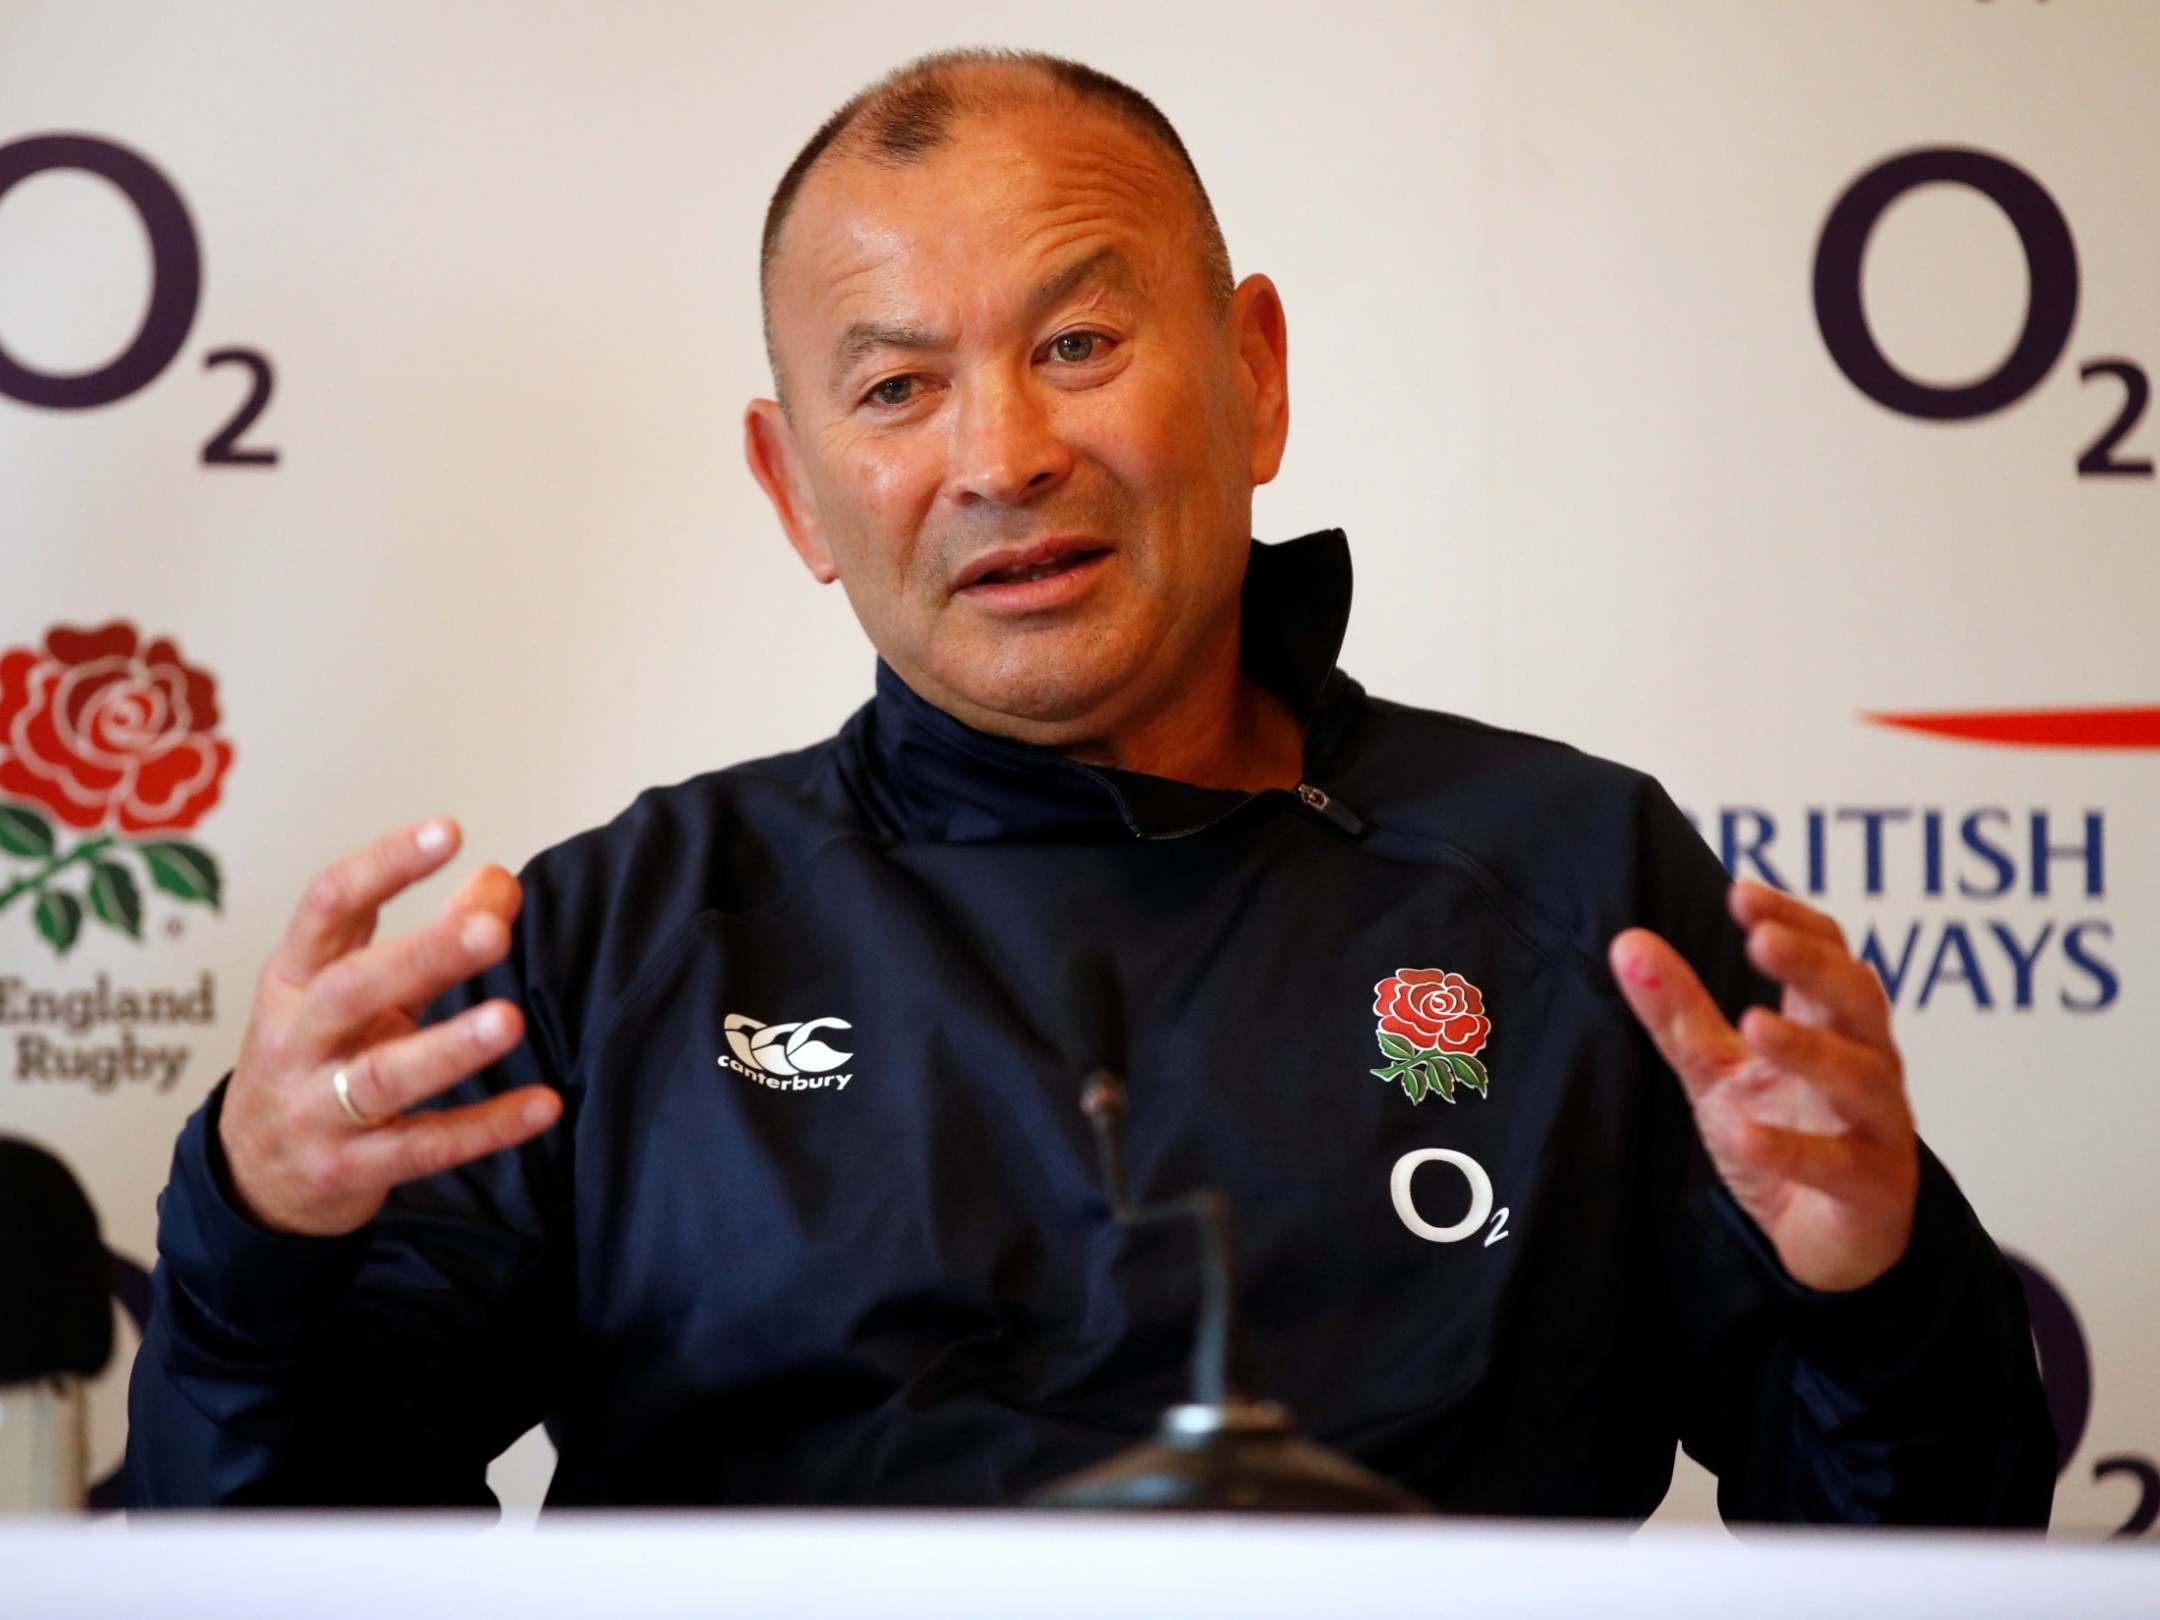 Rugby World Cup 2019: Eddie Jones says Ben Te'o move has no impact on his plans and reacts to James Haskell news